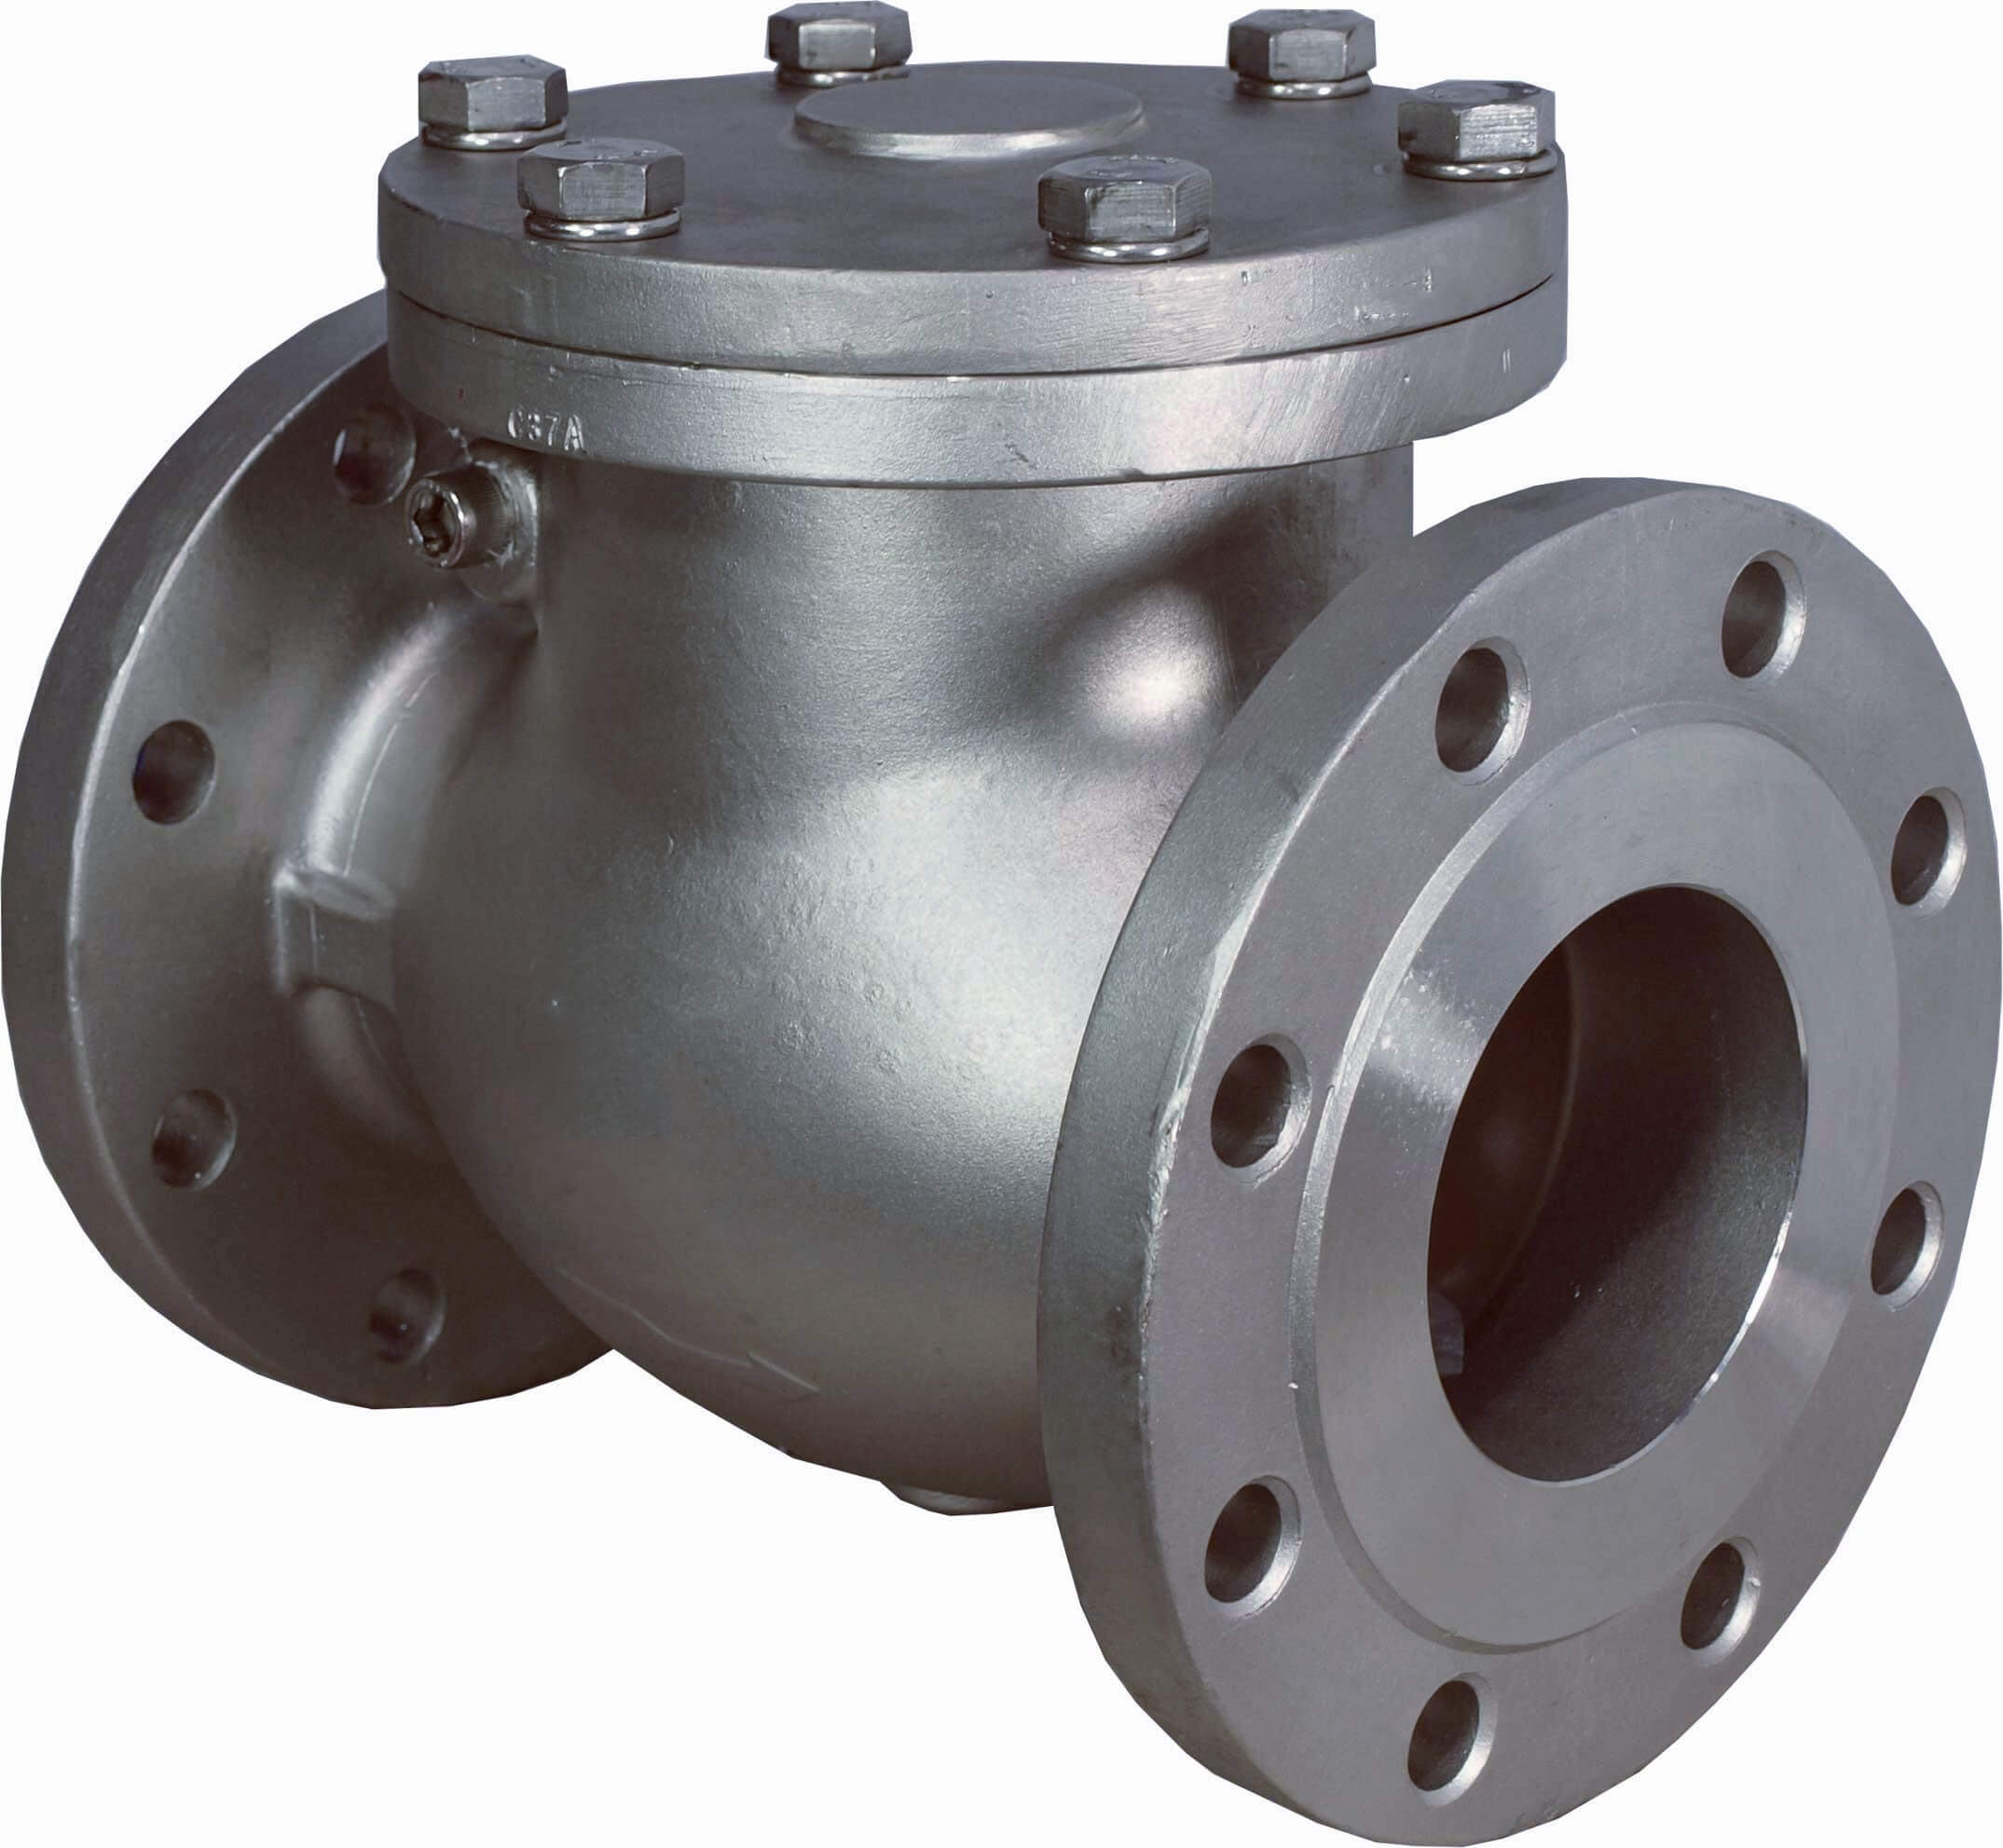 Carbon Steel Stainless Steel Check Manufacture Valve High Pressure